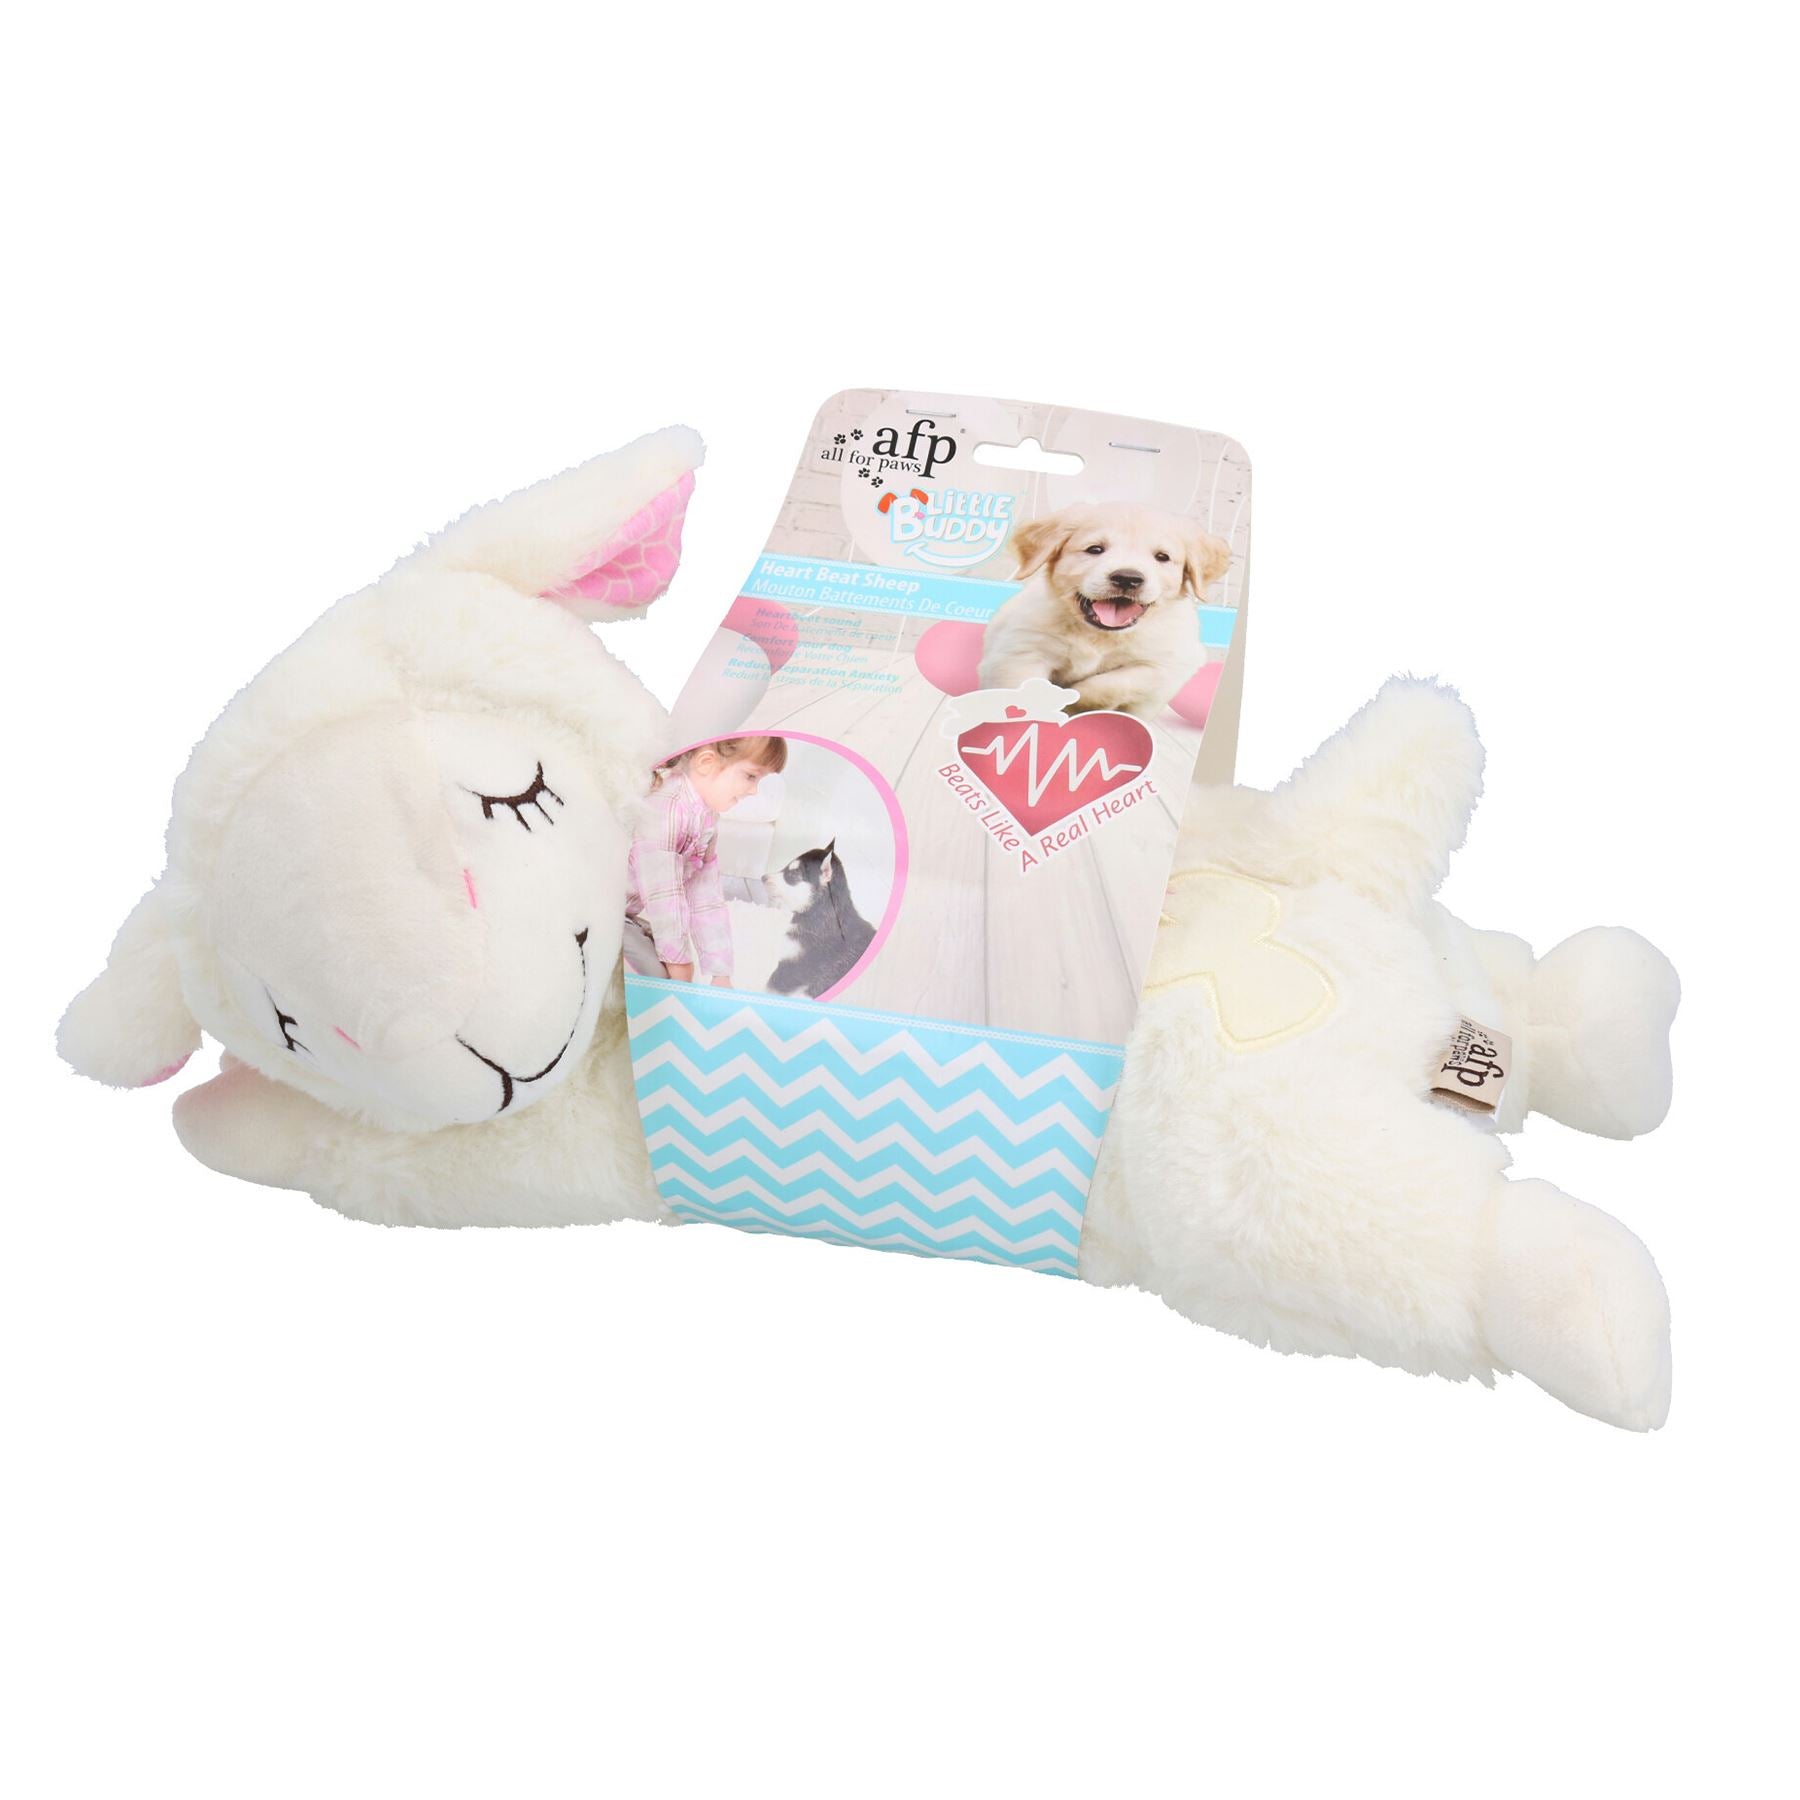 Little Buddy Heart Beat Sheep Puppy Dog Separation Anxiety Comforter Toy